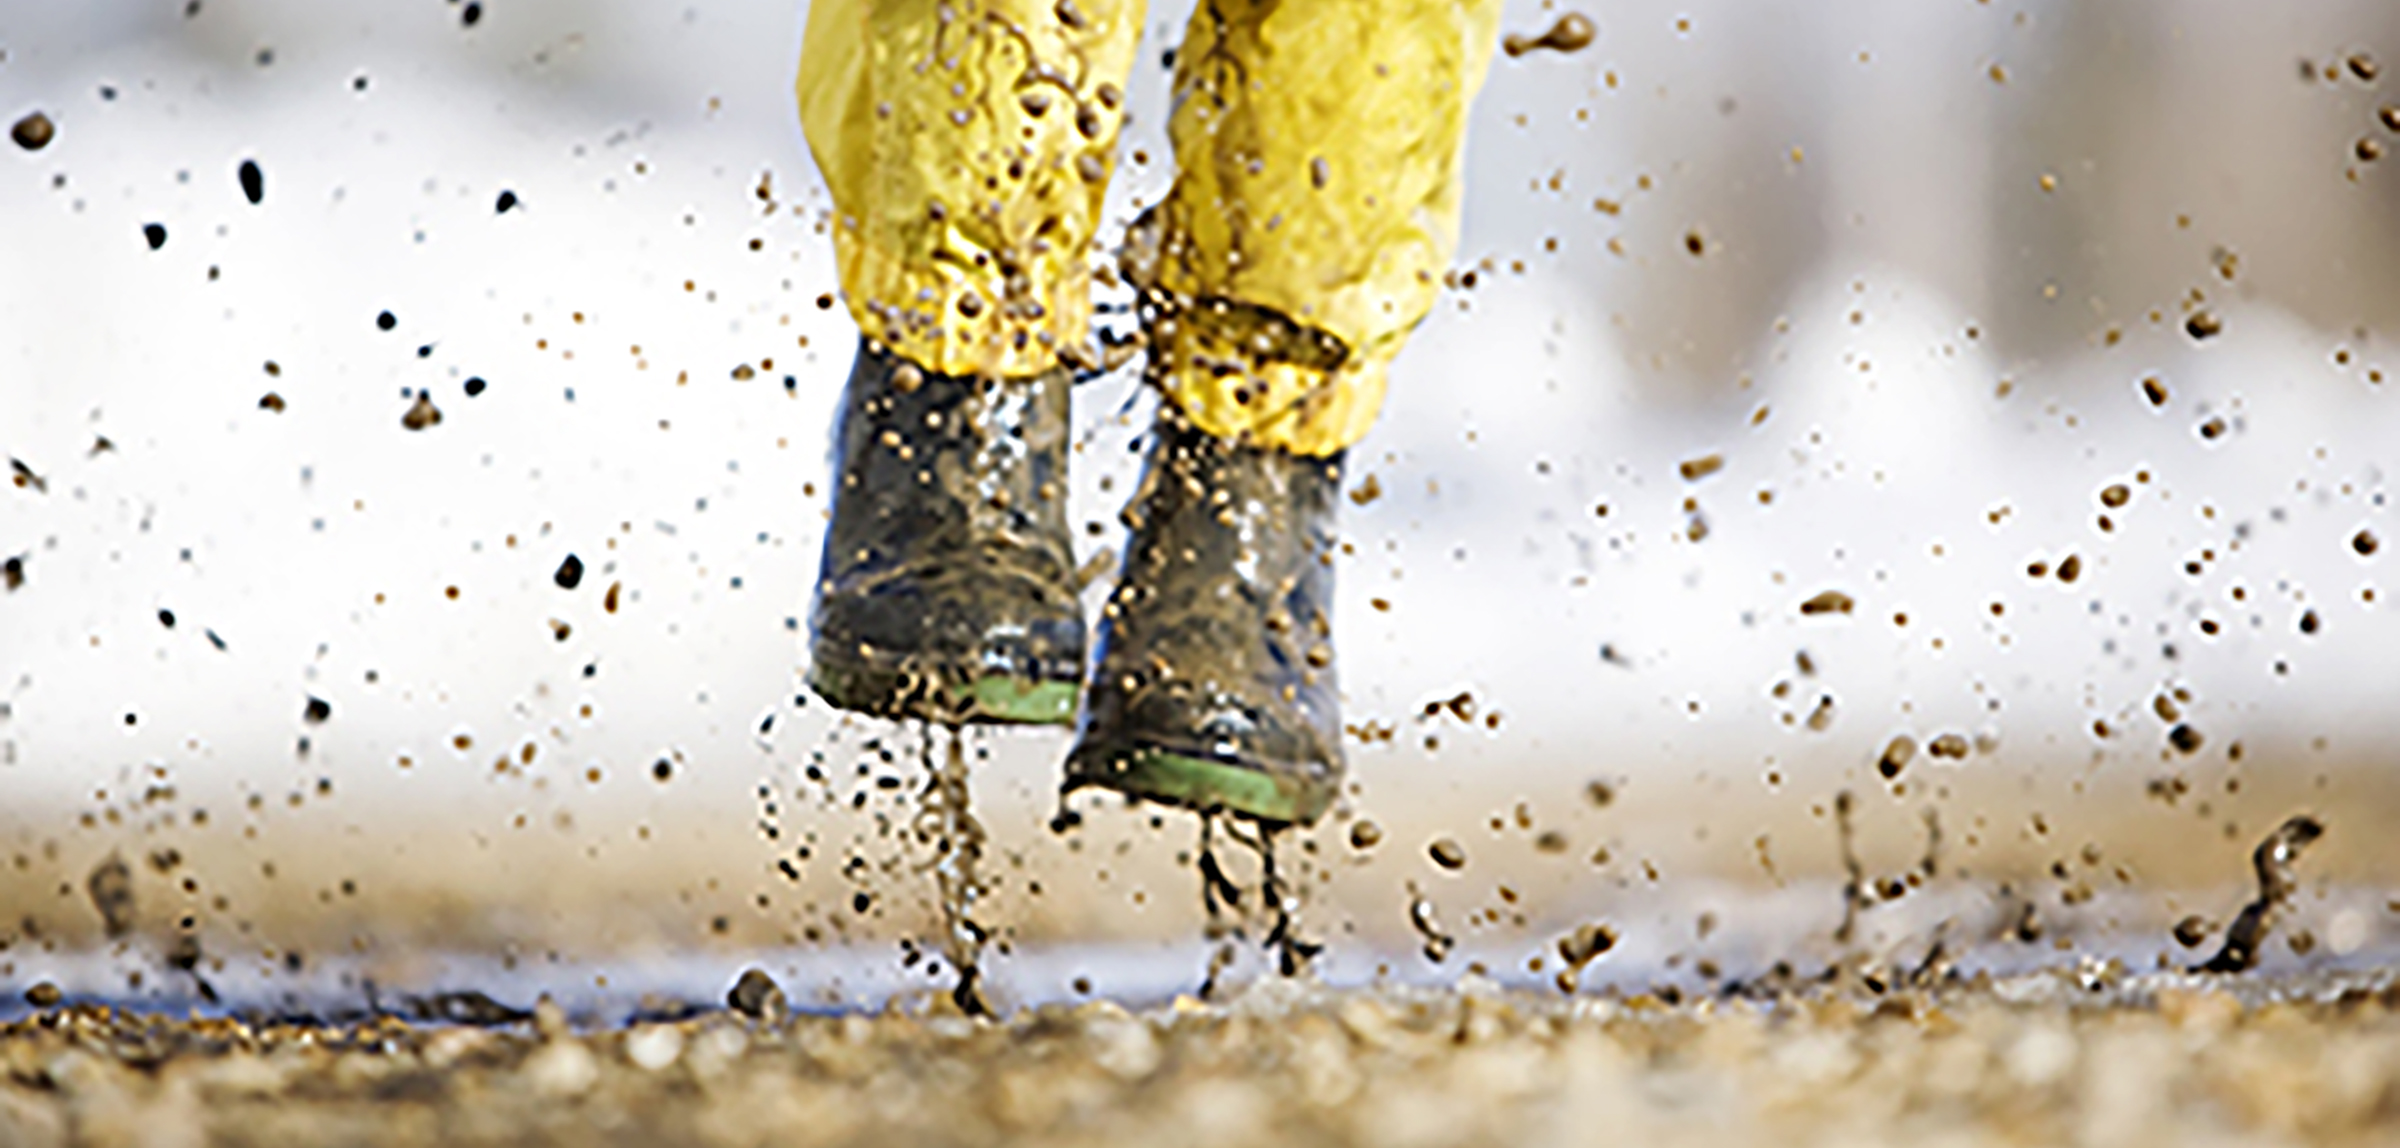 Picture of a child's boots playing in mud